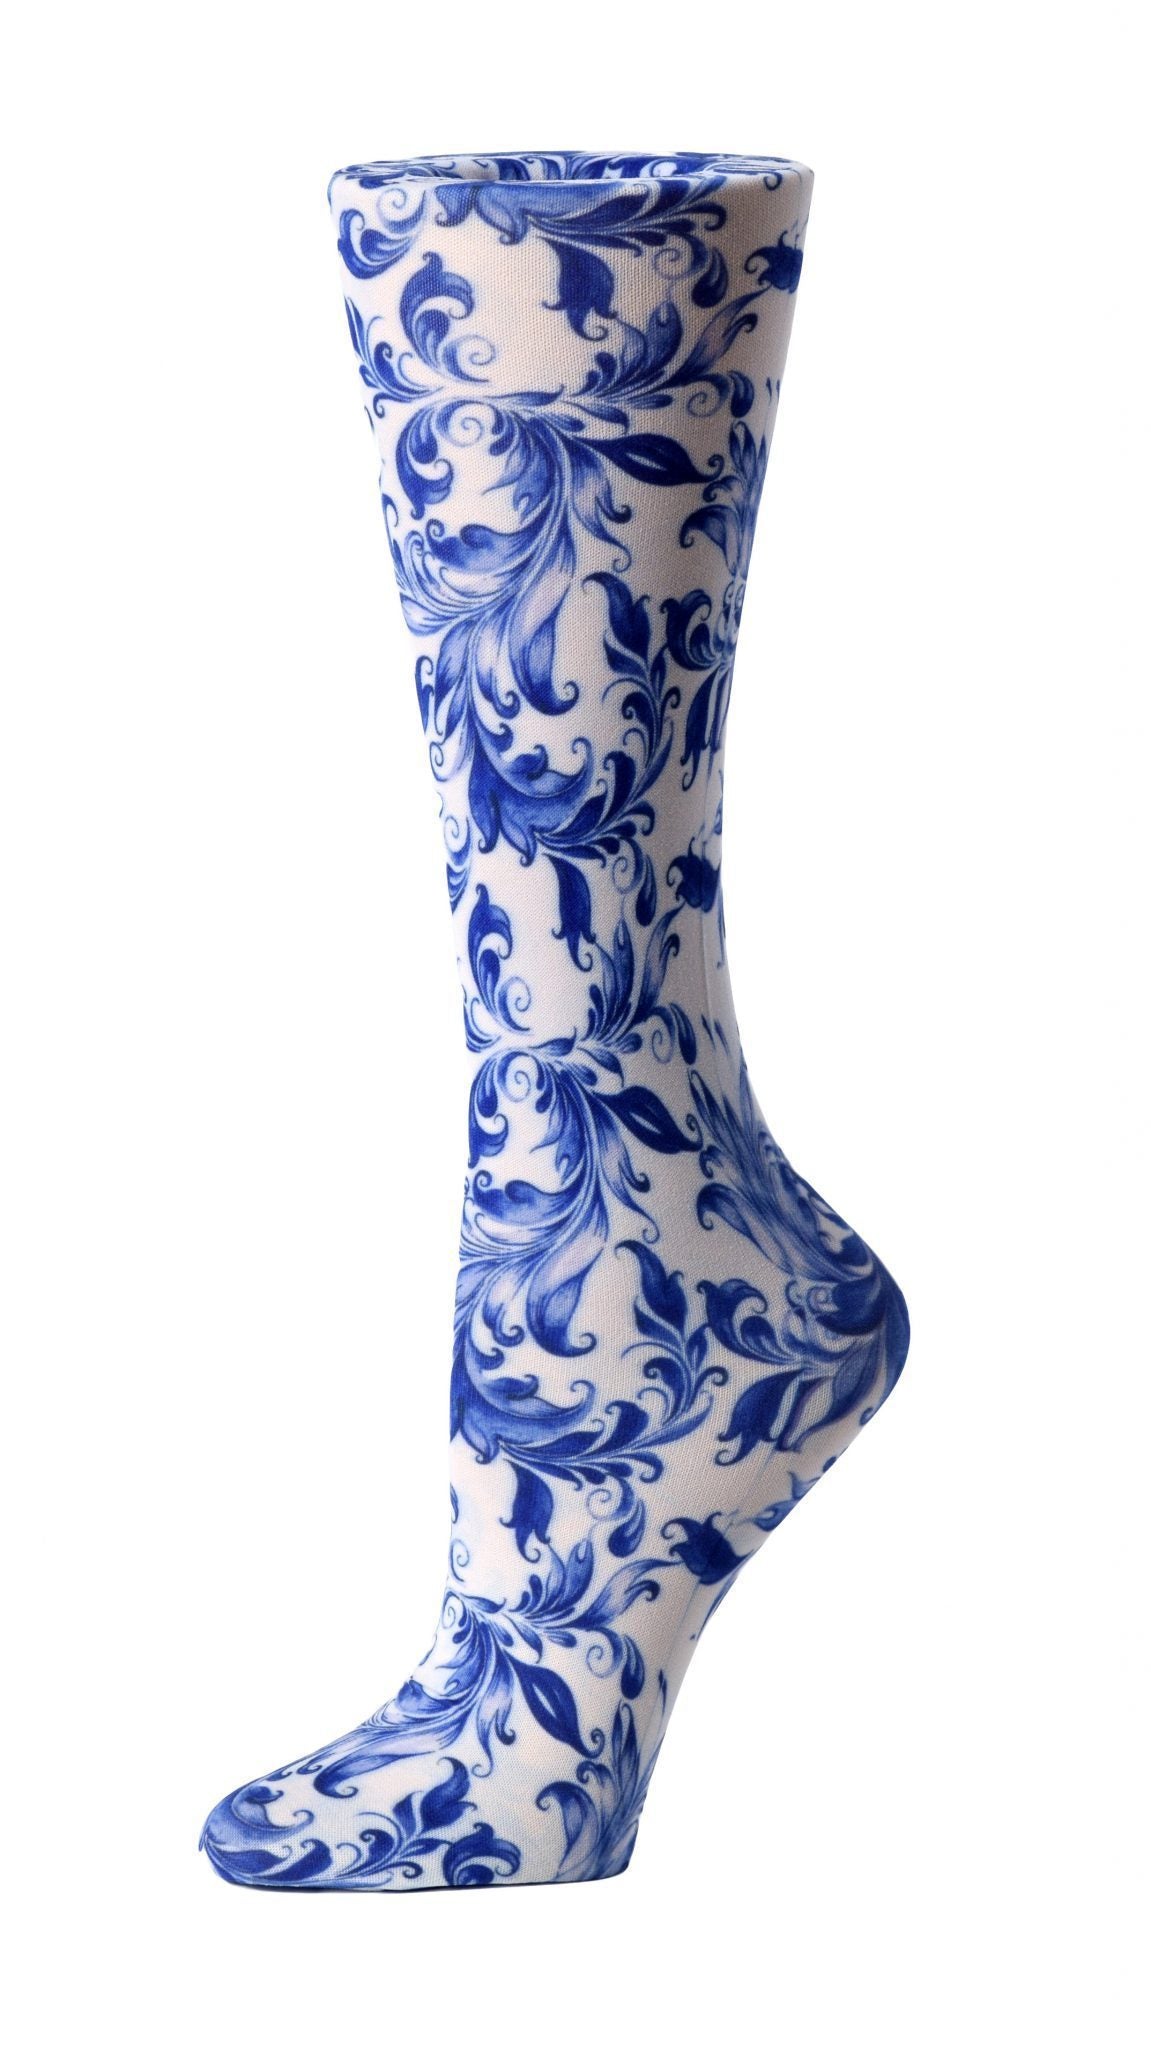 Cutieful Moderate Compression Socks 10-18 MMhg Wide Calf Knit Print Pattern Blue Watercolor Flowers at Parker's Clothing and Shoes.